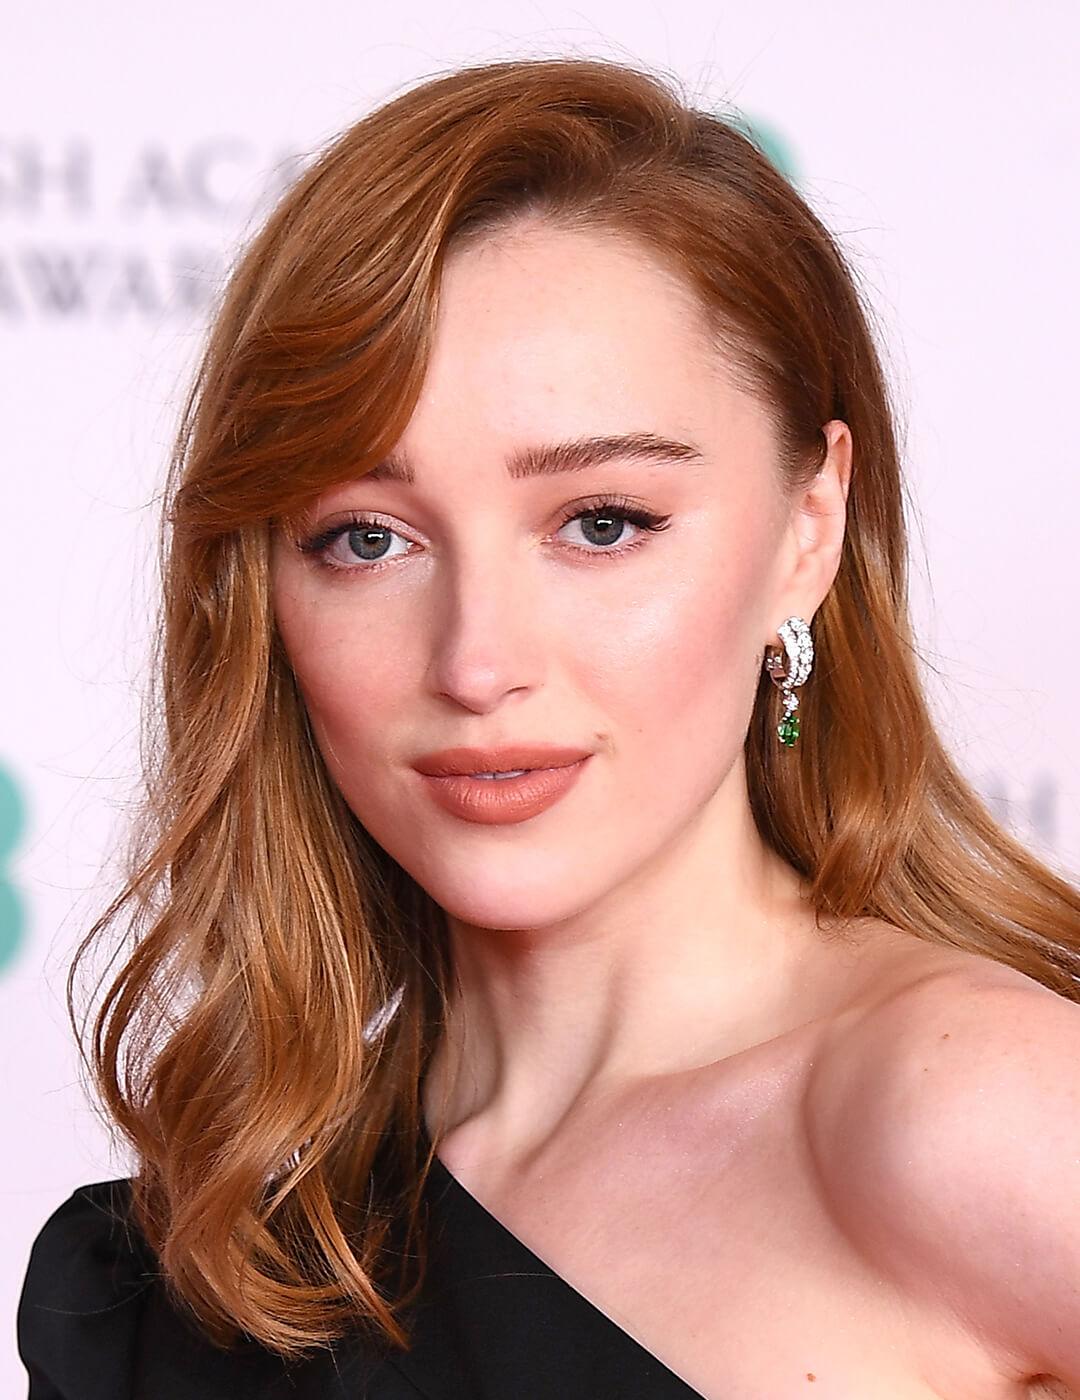 A photo of Phoebe Dynevor with a copper colored hair wearing a black dress